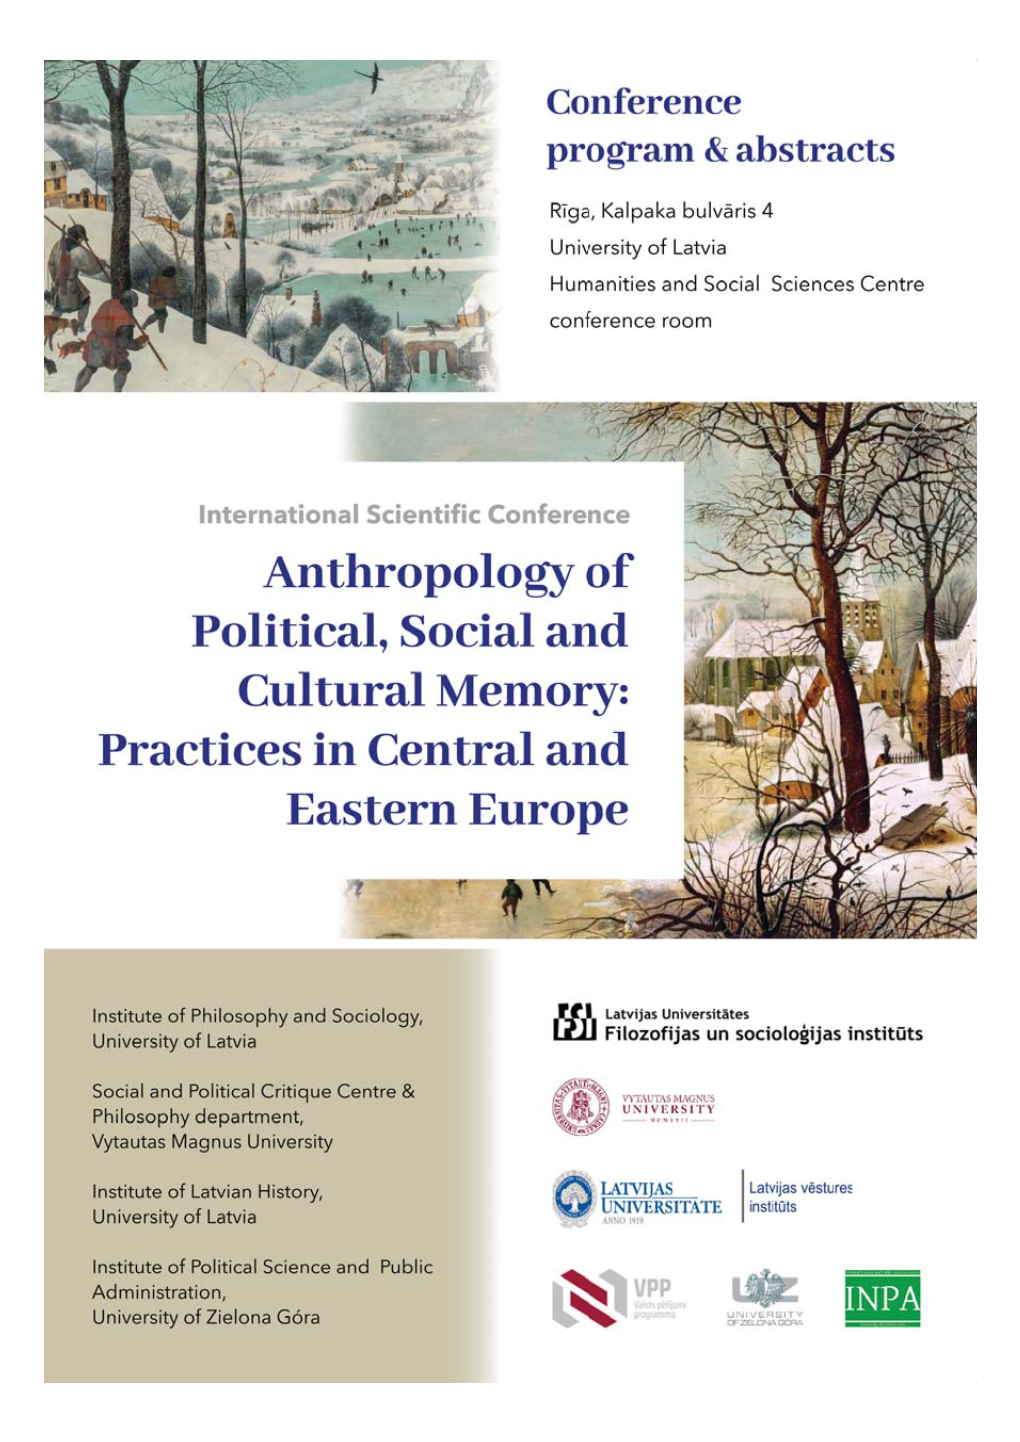 Anthropology of Political, Social and Cultural Memory: Practices in Central and Eastern Europe